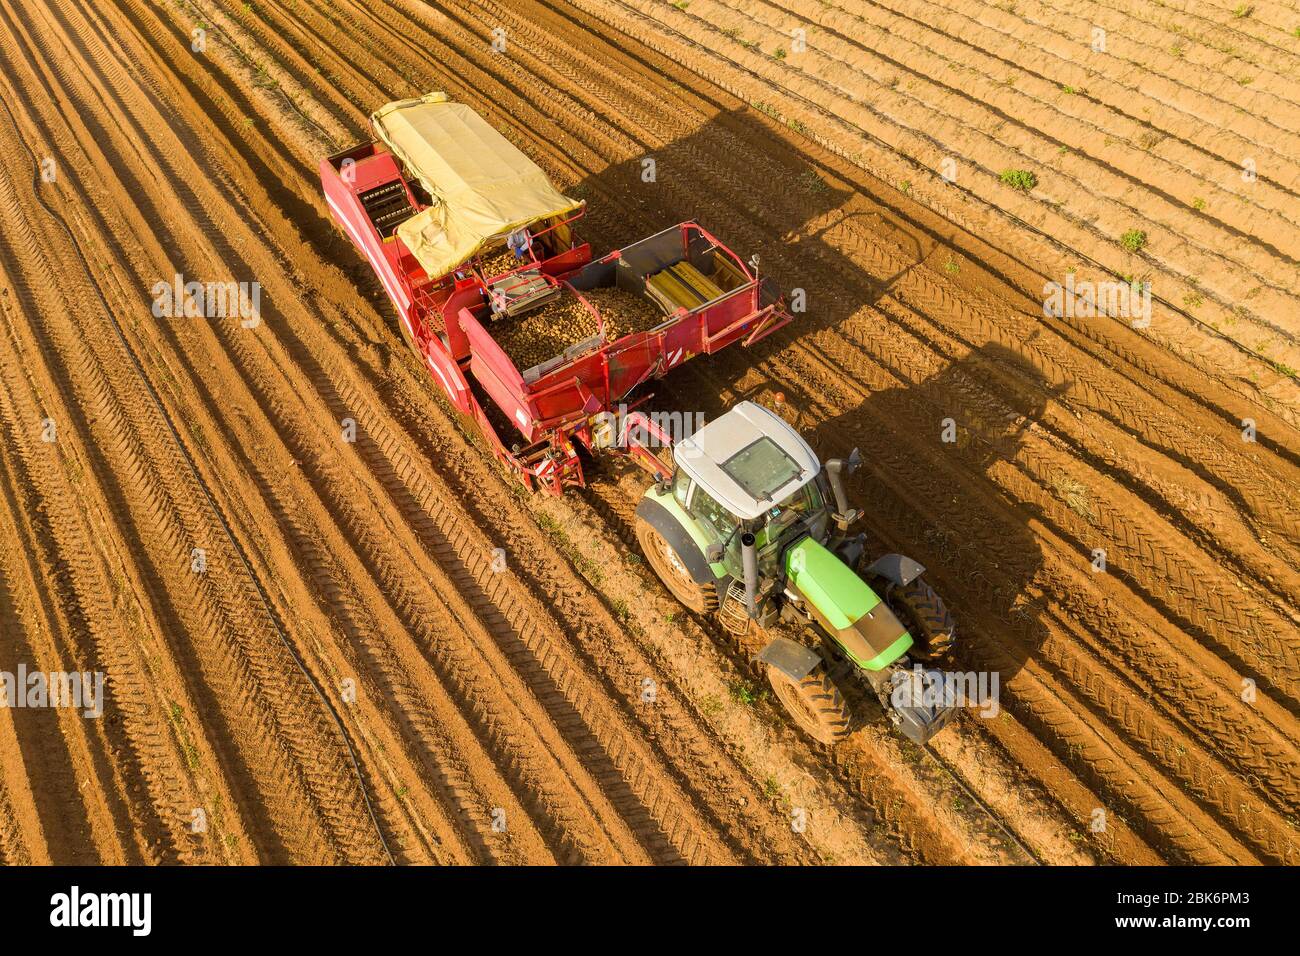 Large Potato Harvester pulled by a Tractor processing a filed, with ripe Potatoes dropping from picking table and conveyor belt into a storage bucket. Stock Photo